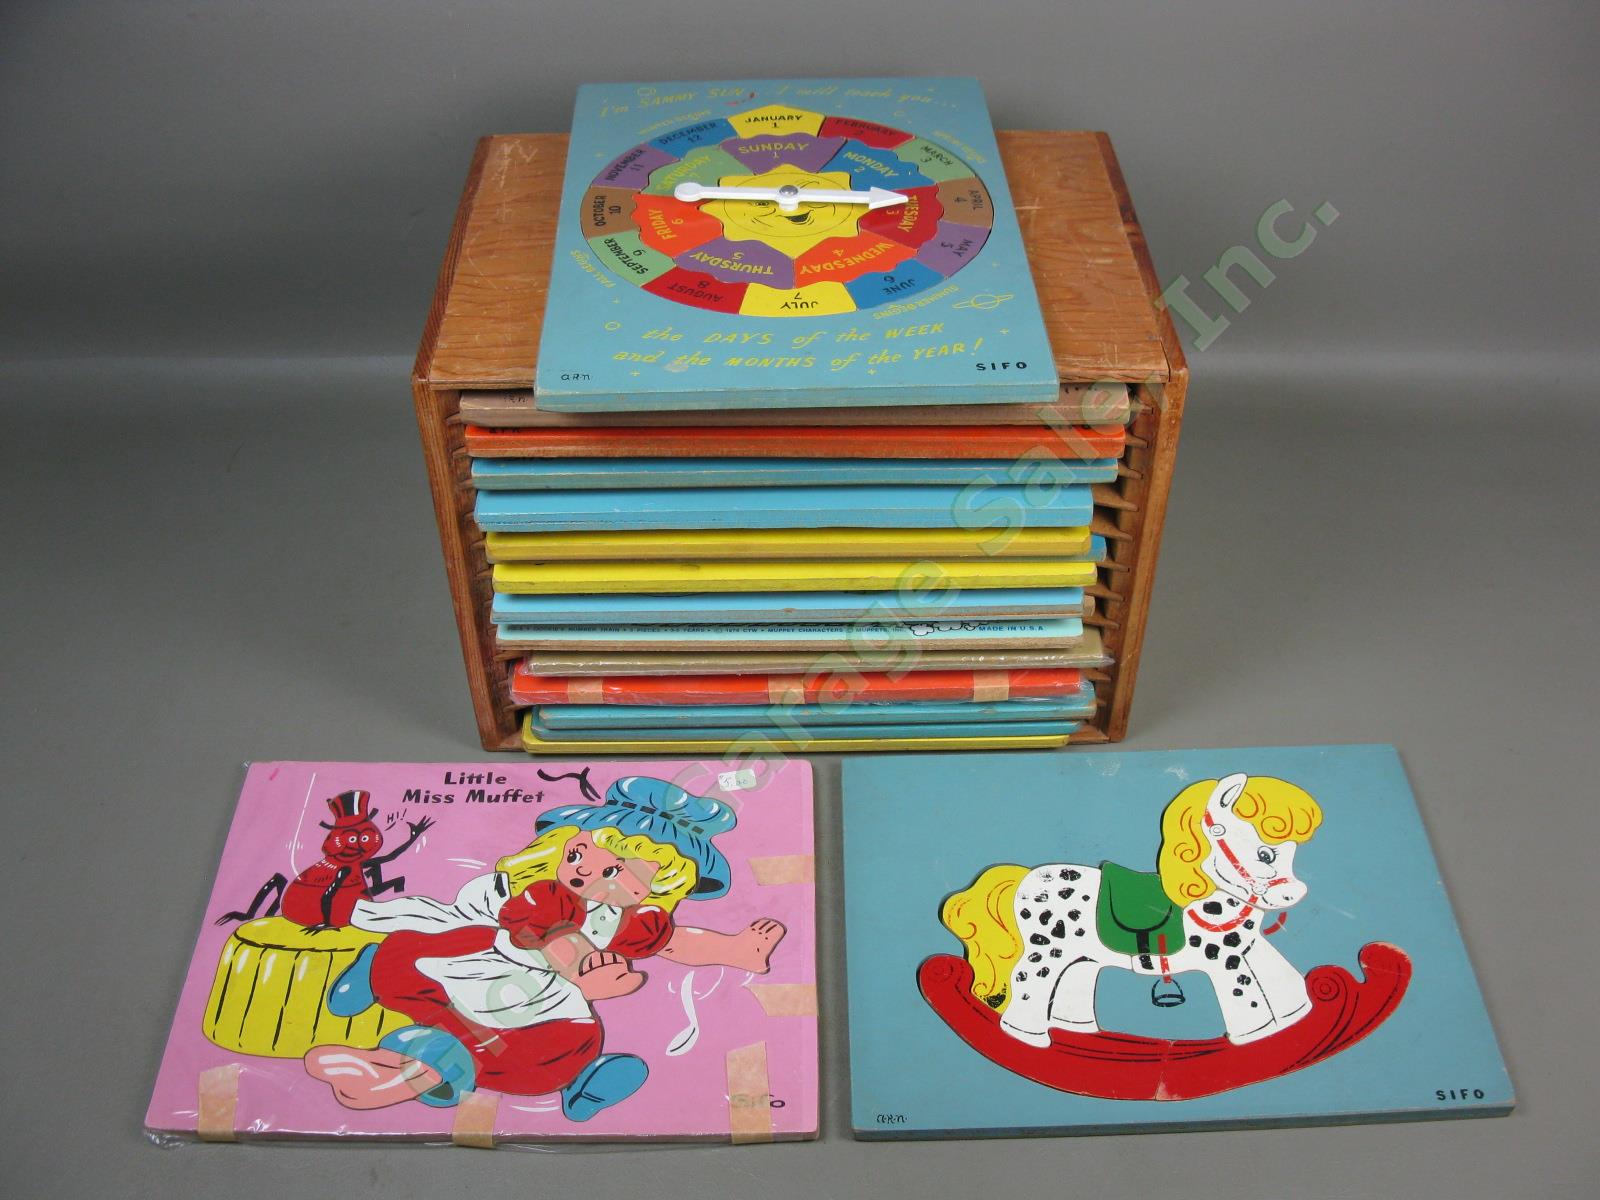 Vtg 18 Piece COMPLETE Wooden Frame Tray Jigsaw Puzzle Lot +Box Playskool Sifo NR